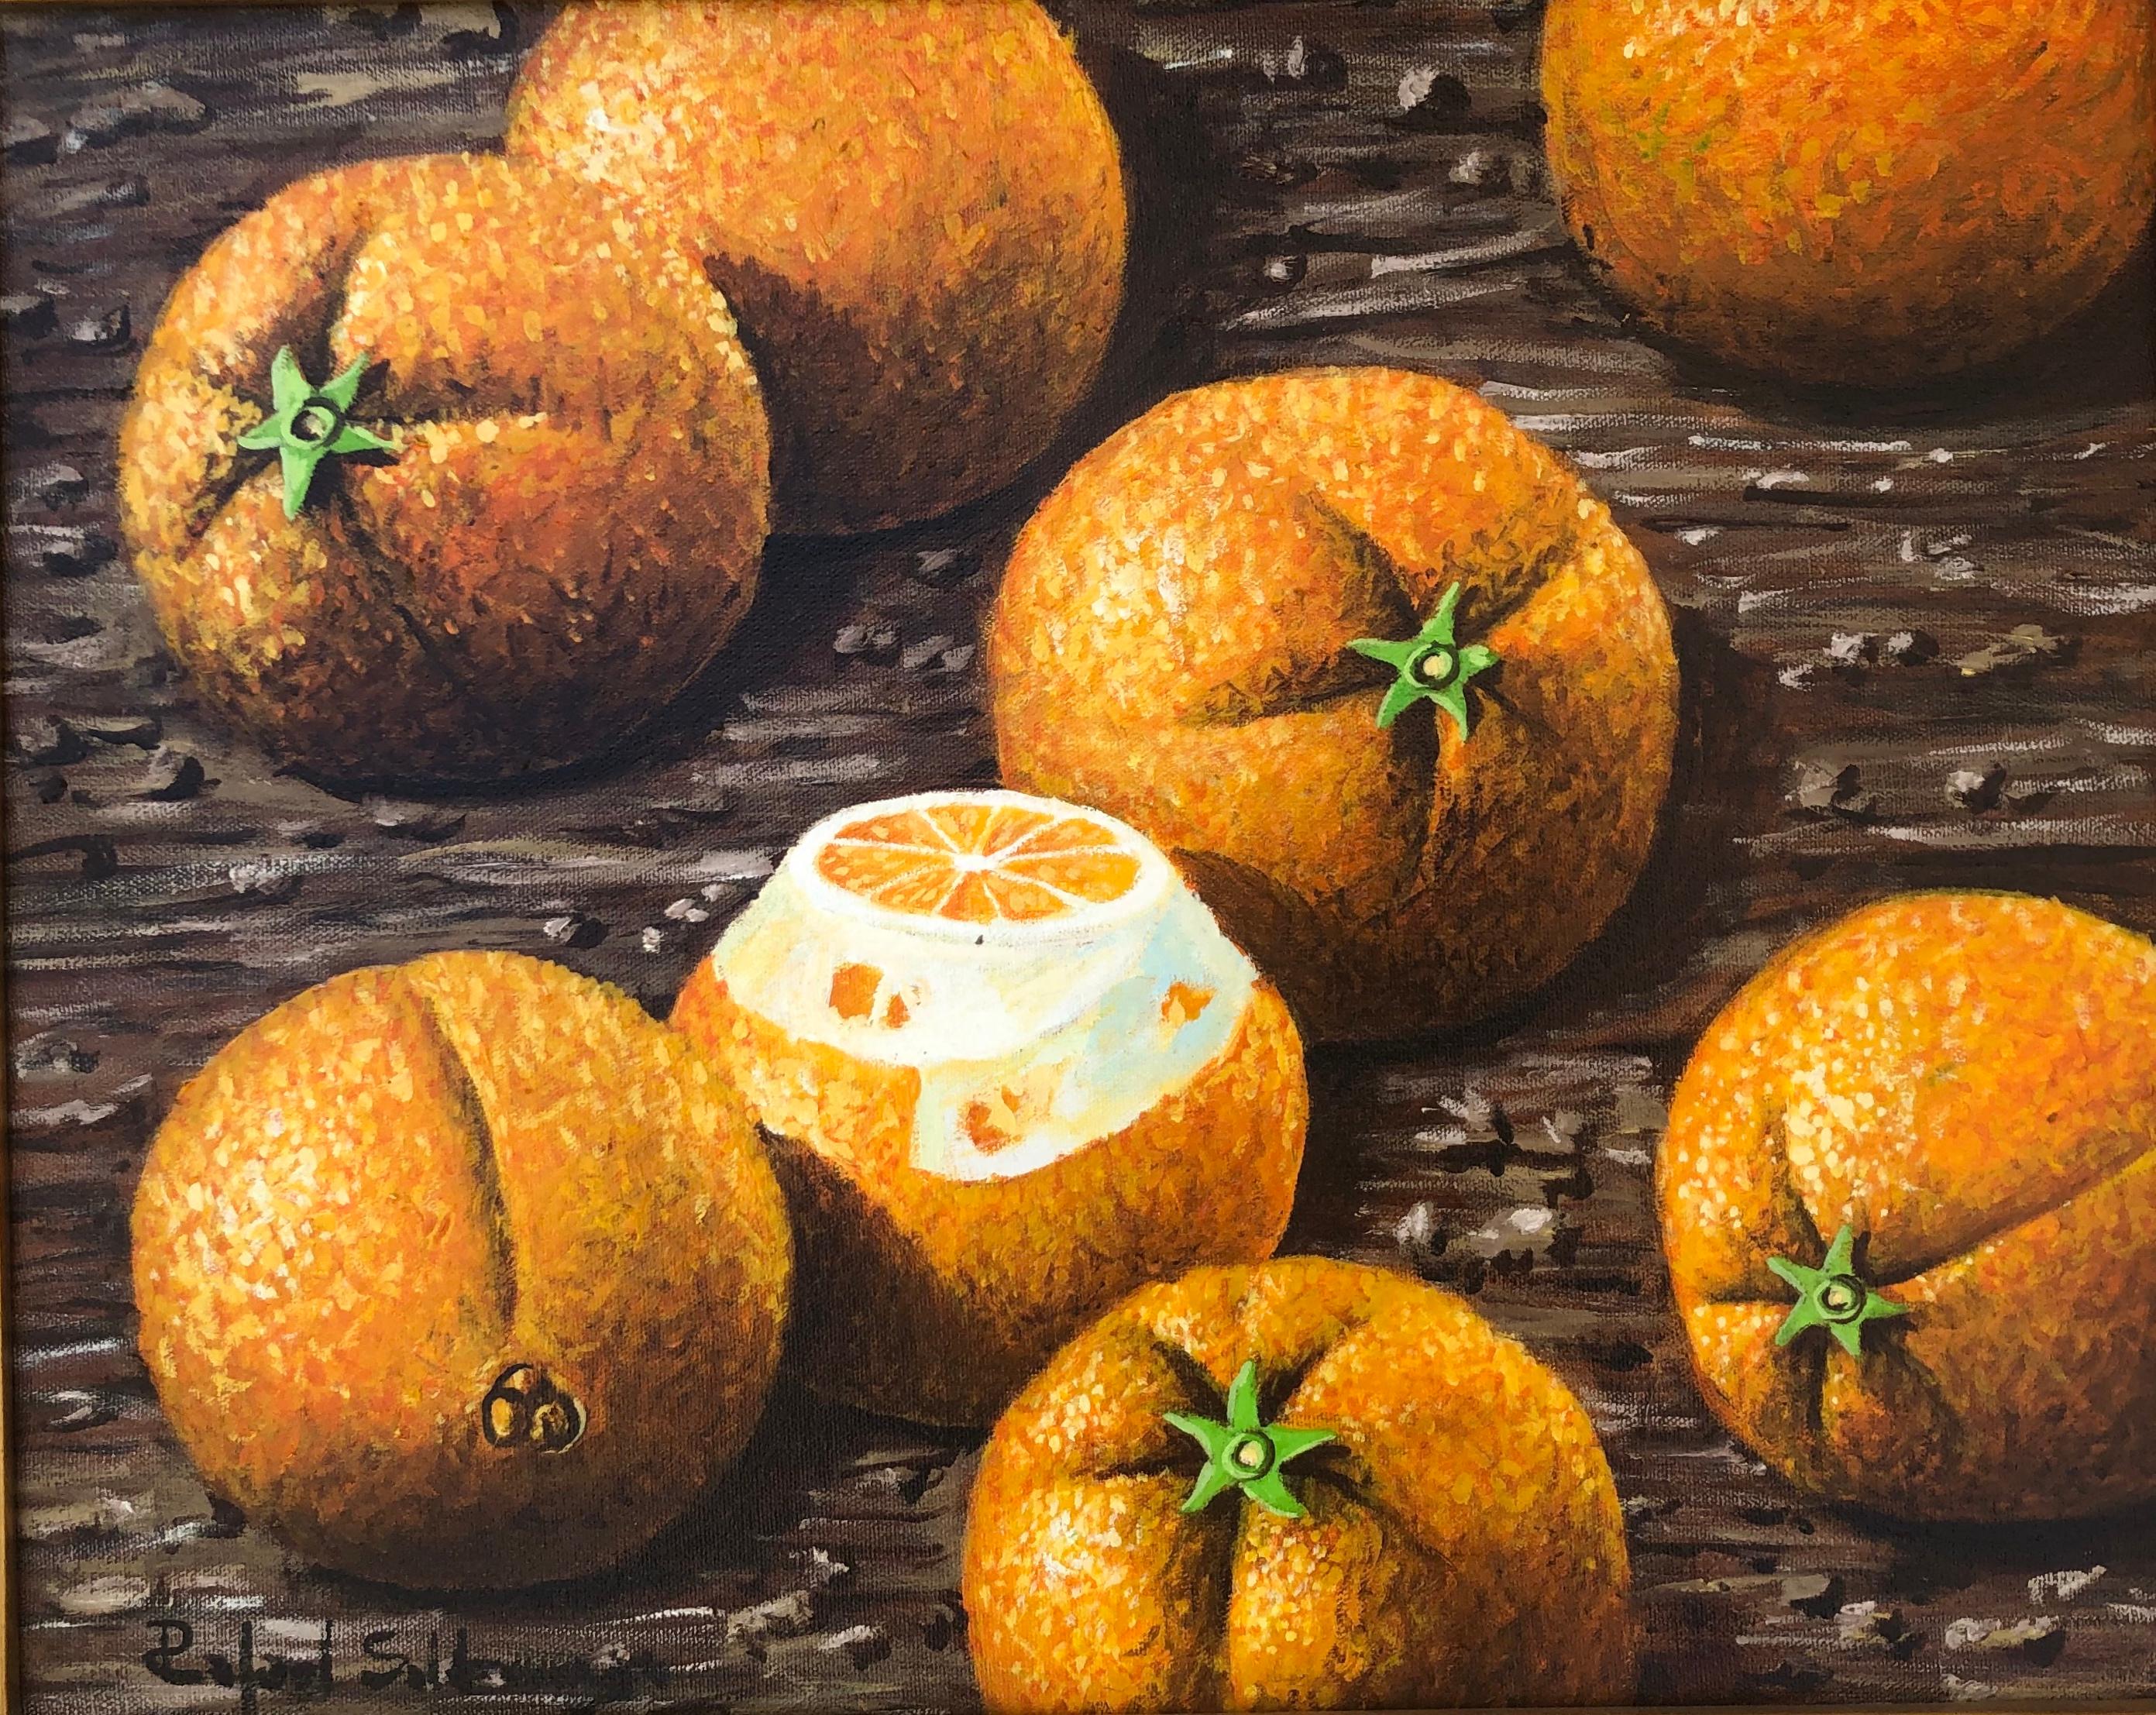 Still Life with Oranges - Painting by Rafael Saldarriaga